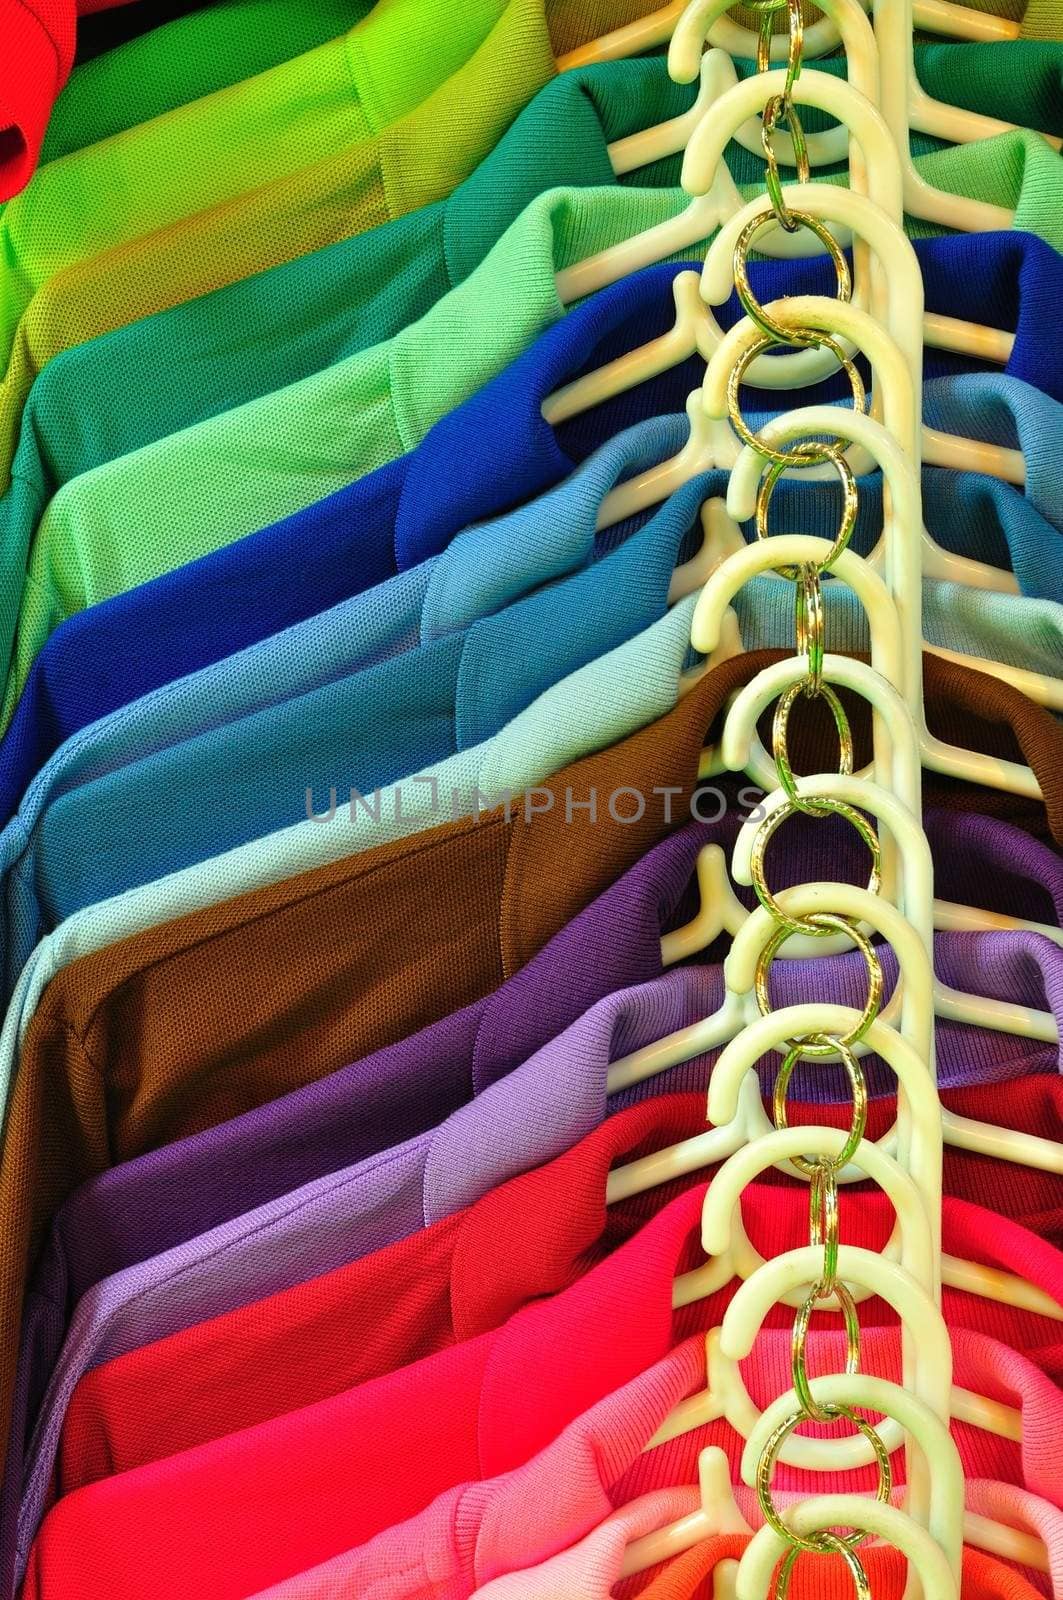 Row of Multi color T-shirt